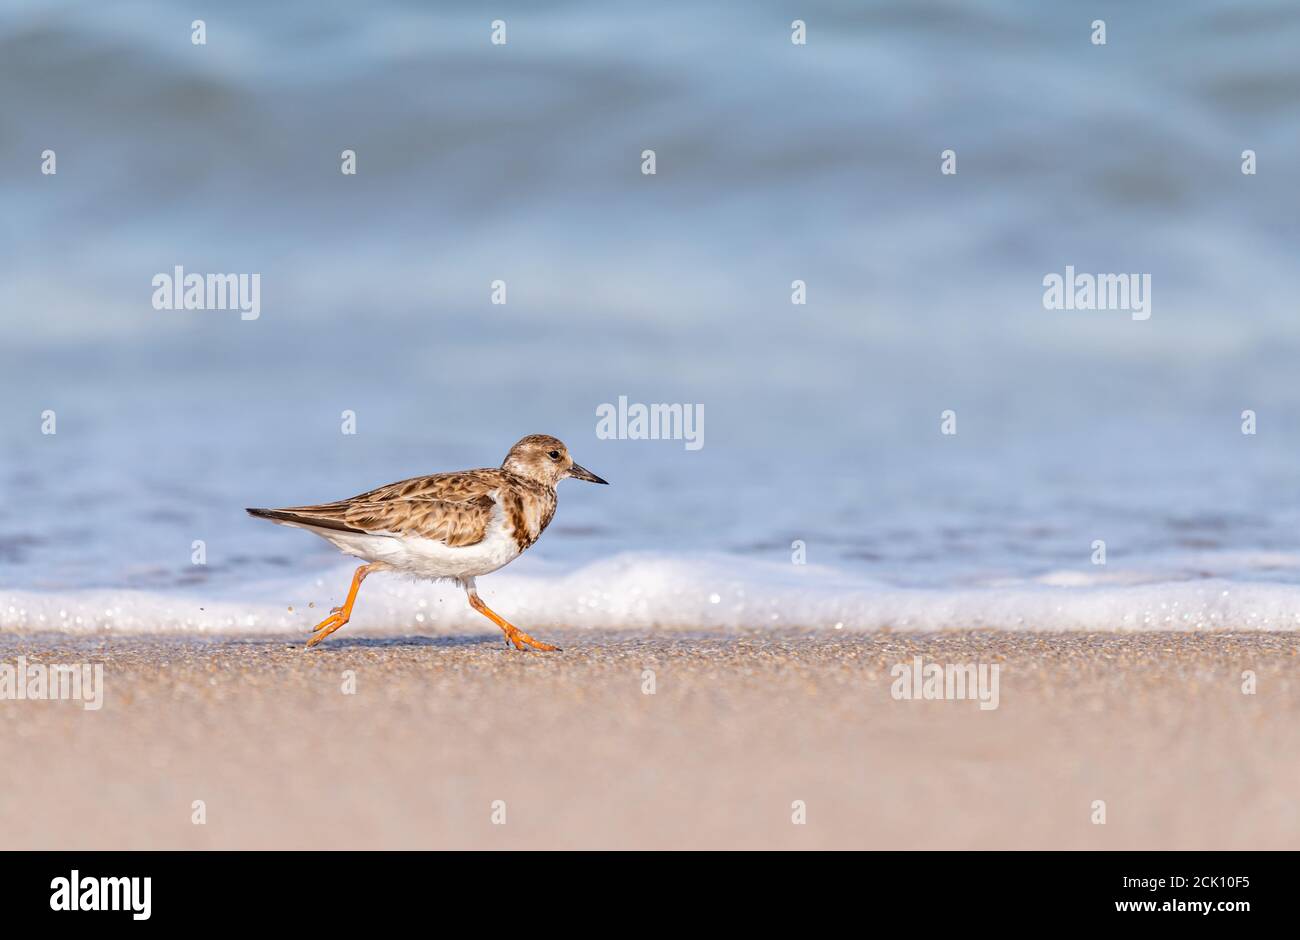 A ruddy turnstone (Arenaria interpres) shore bird running on the beach at the  Cape Canaveral National Seashore. Stock Photo